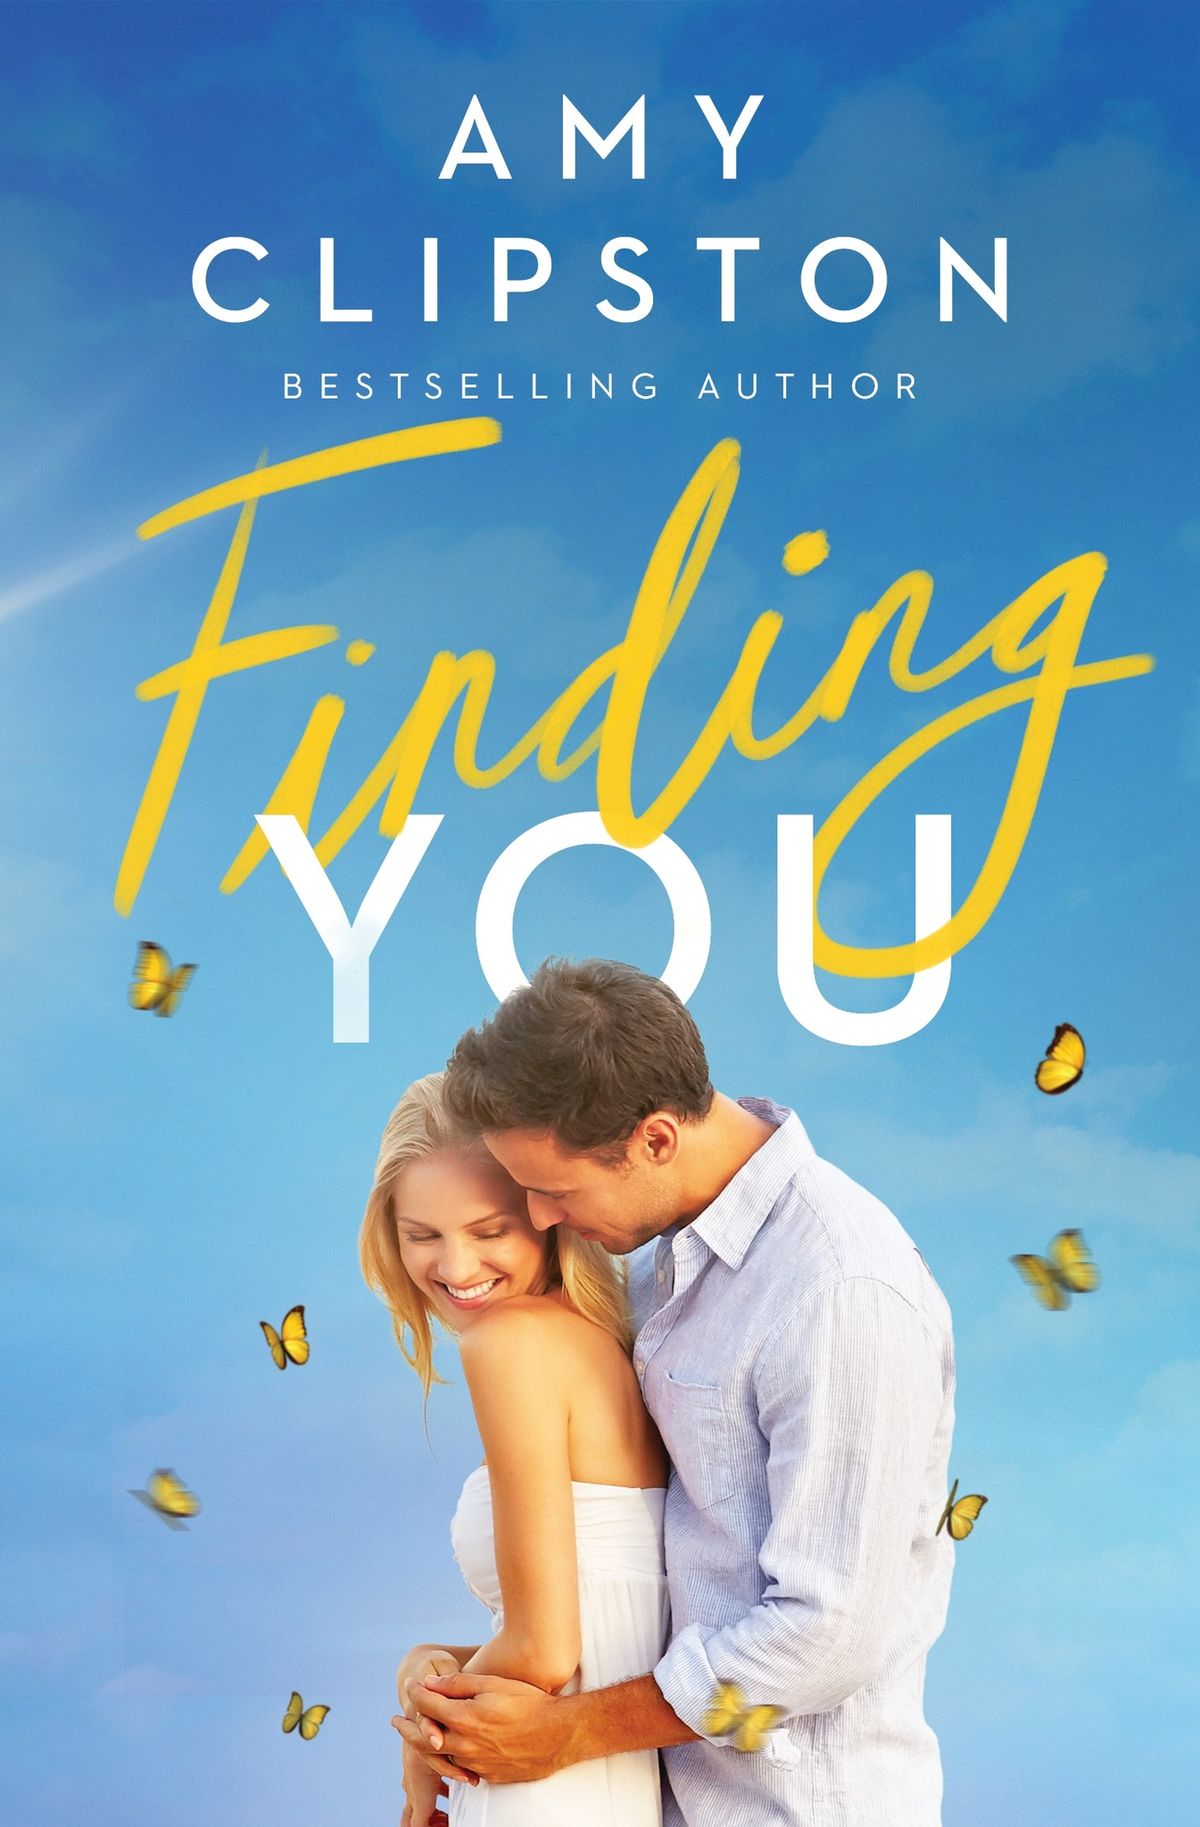 Book Release Party\/Book Signing for Finding You!